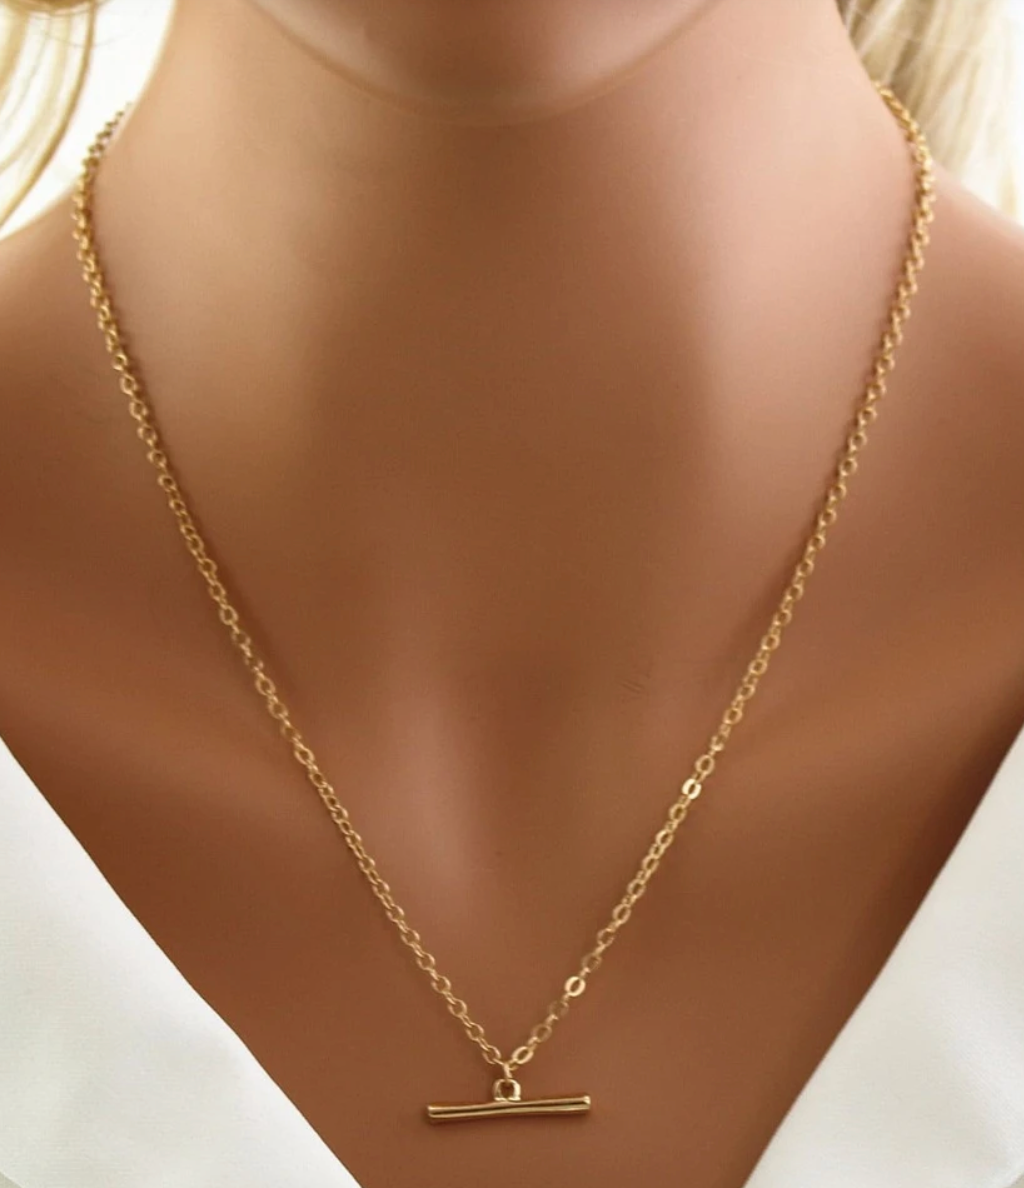 N213 - Necklace